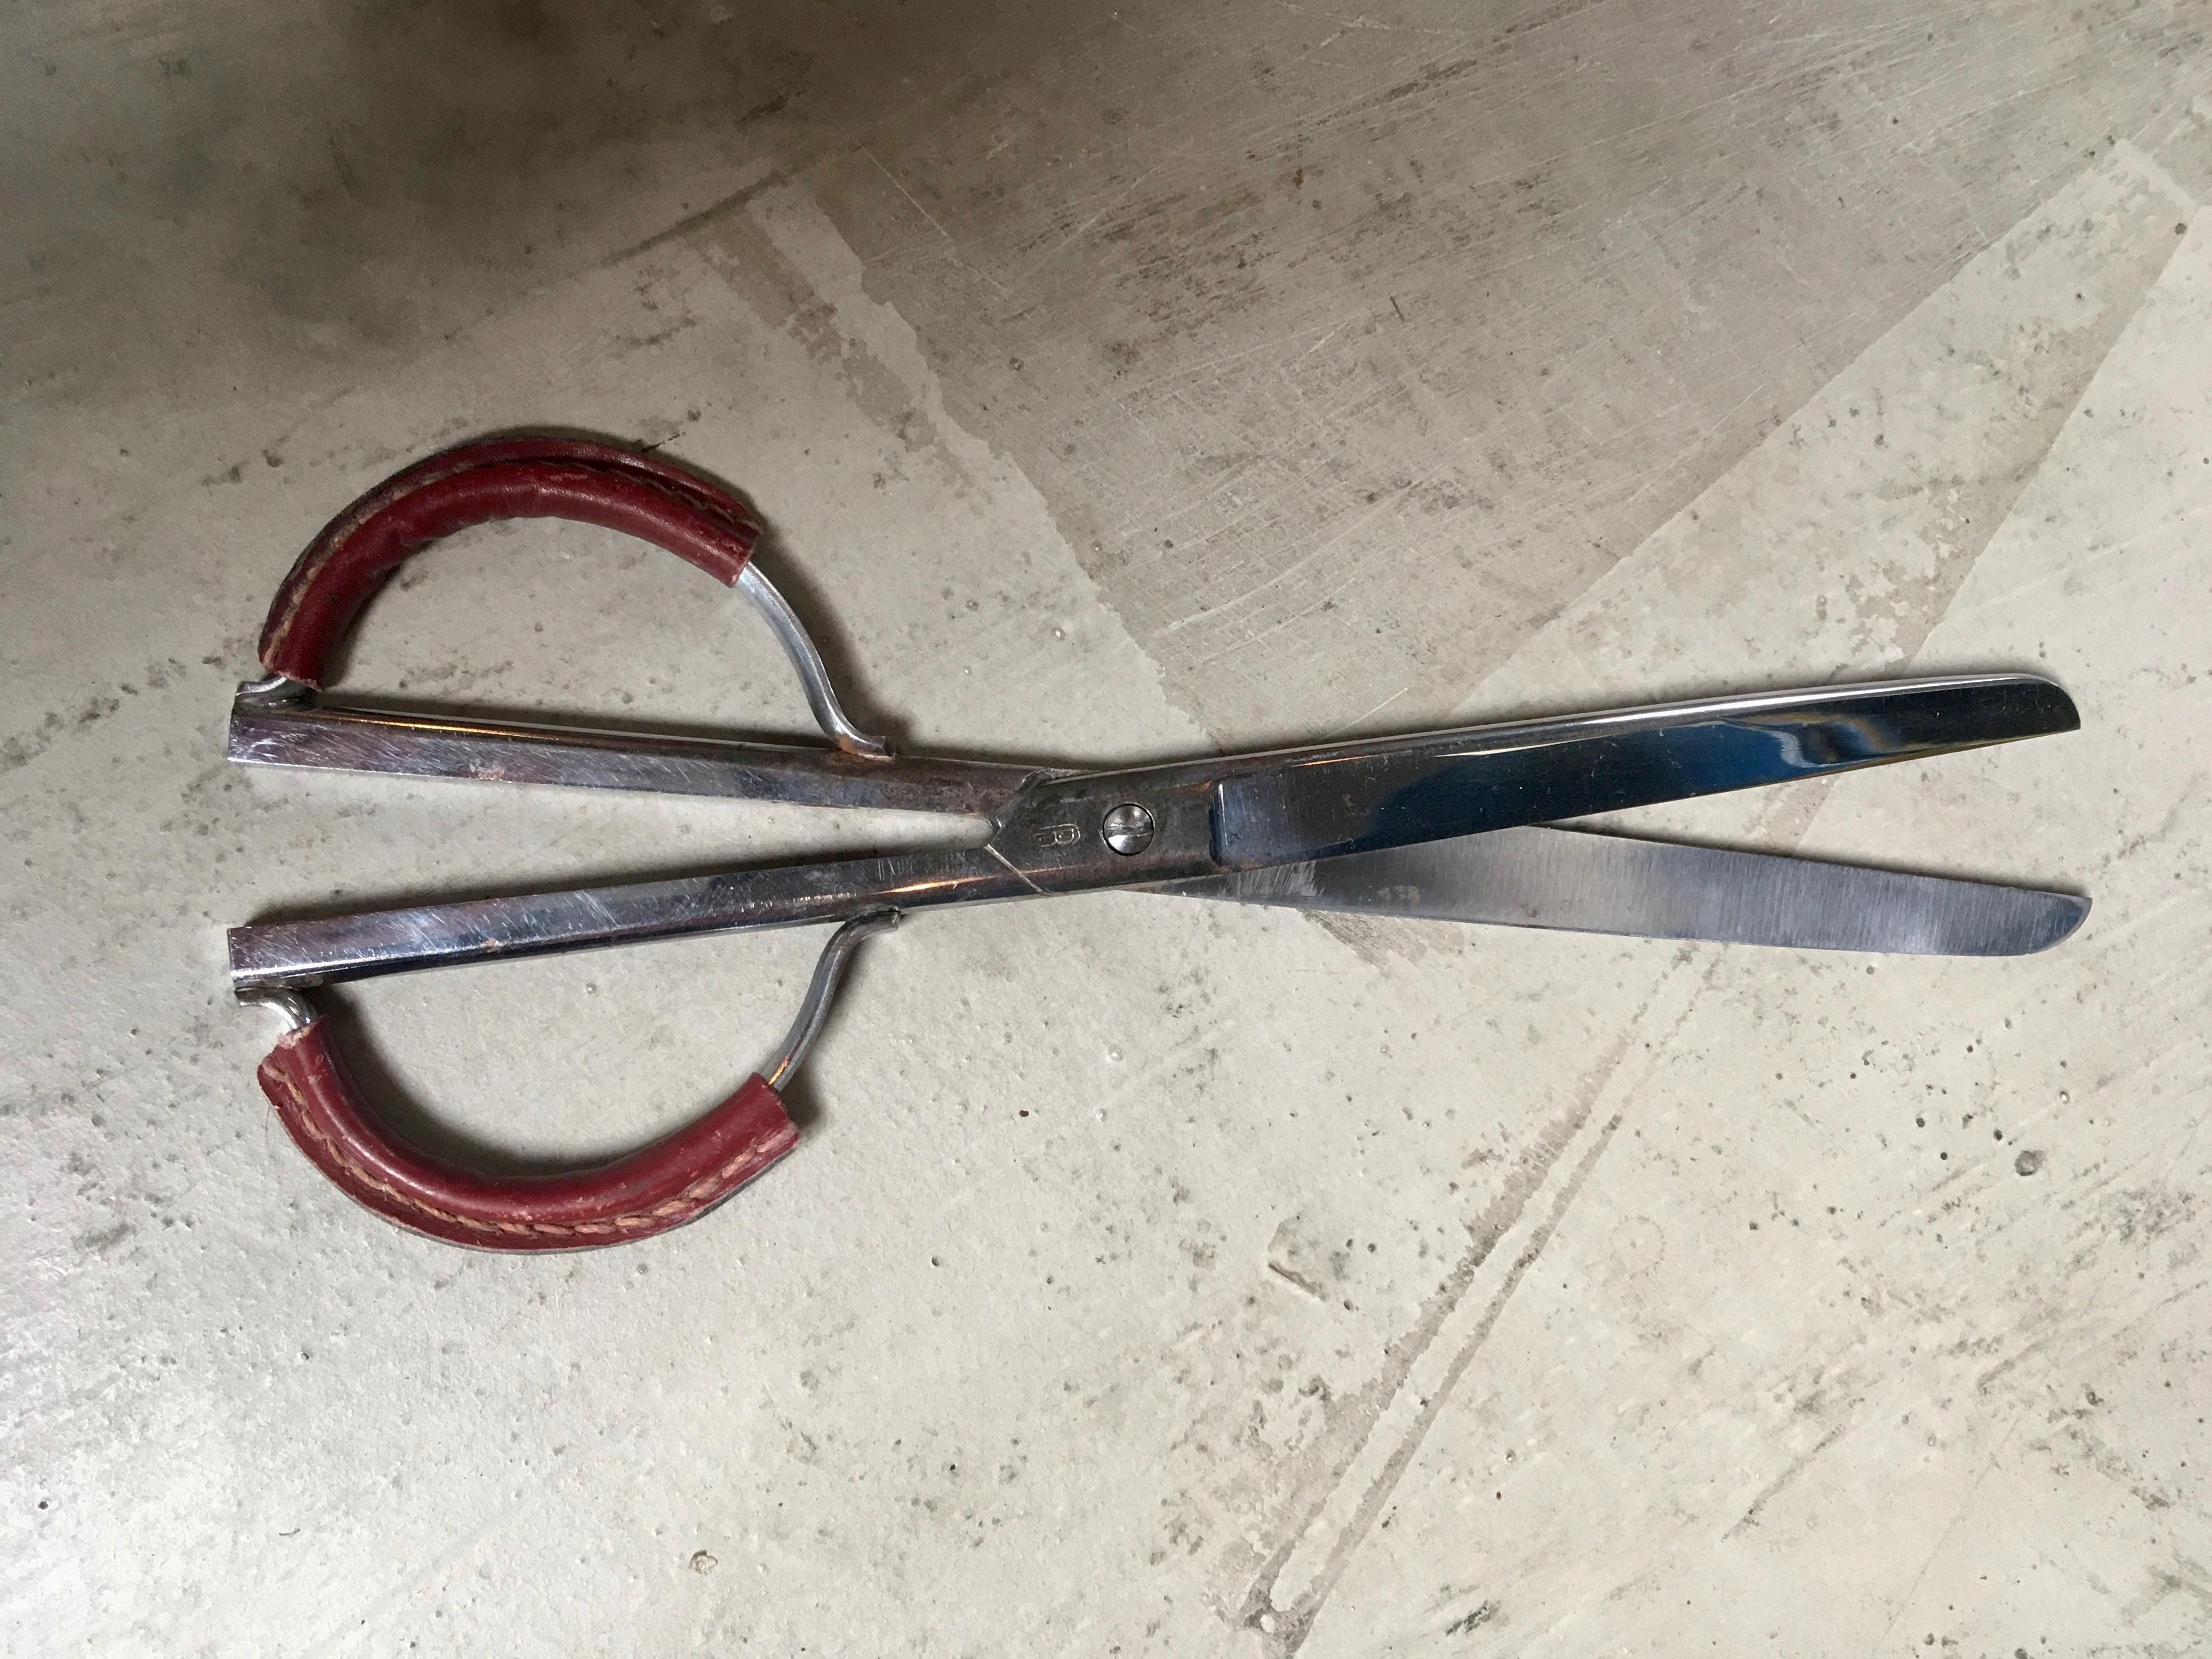 Handsome nickel scissors with leather wrapped handles in the style of Jacques Adnet. Burgundy leather with signature Adnet stitching. Good vintage condition.